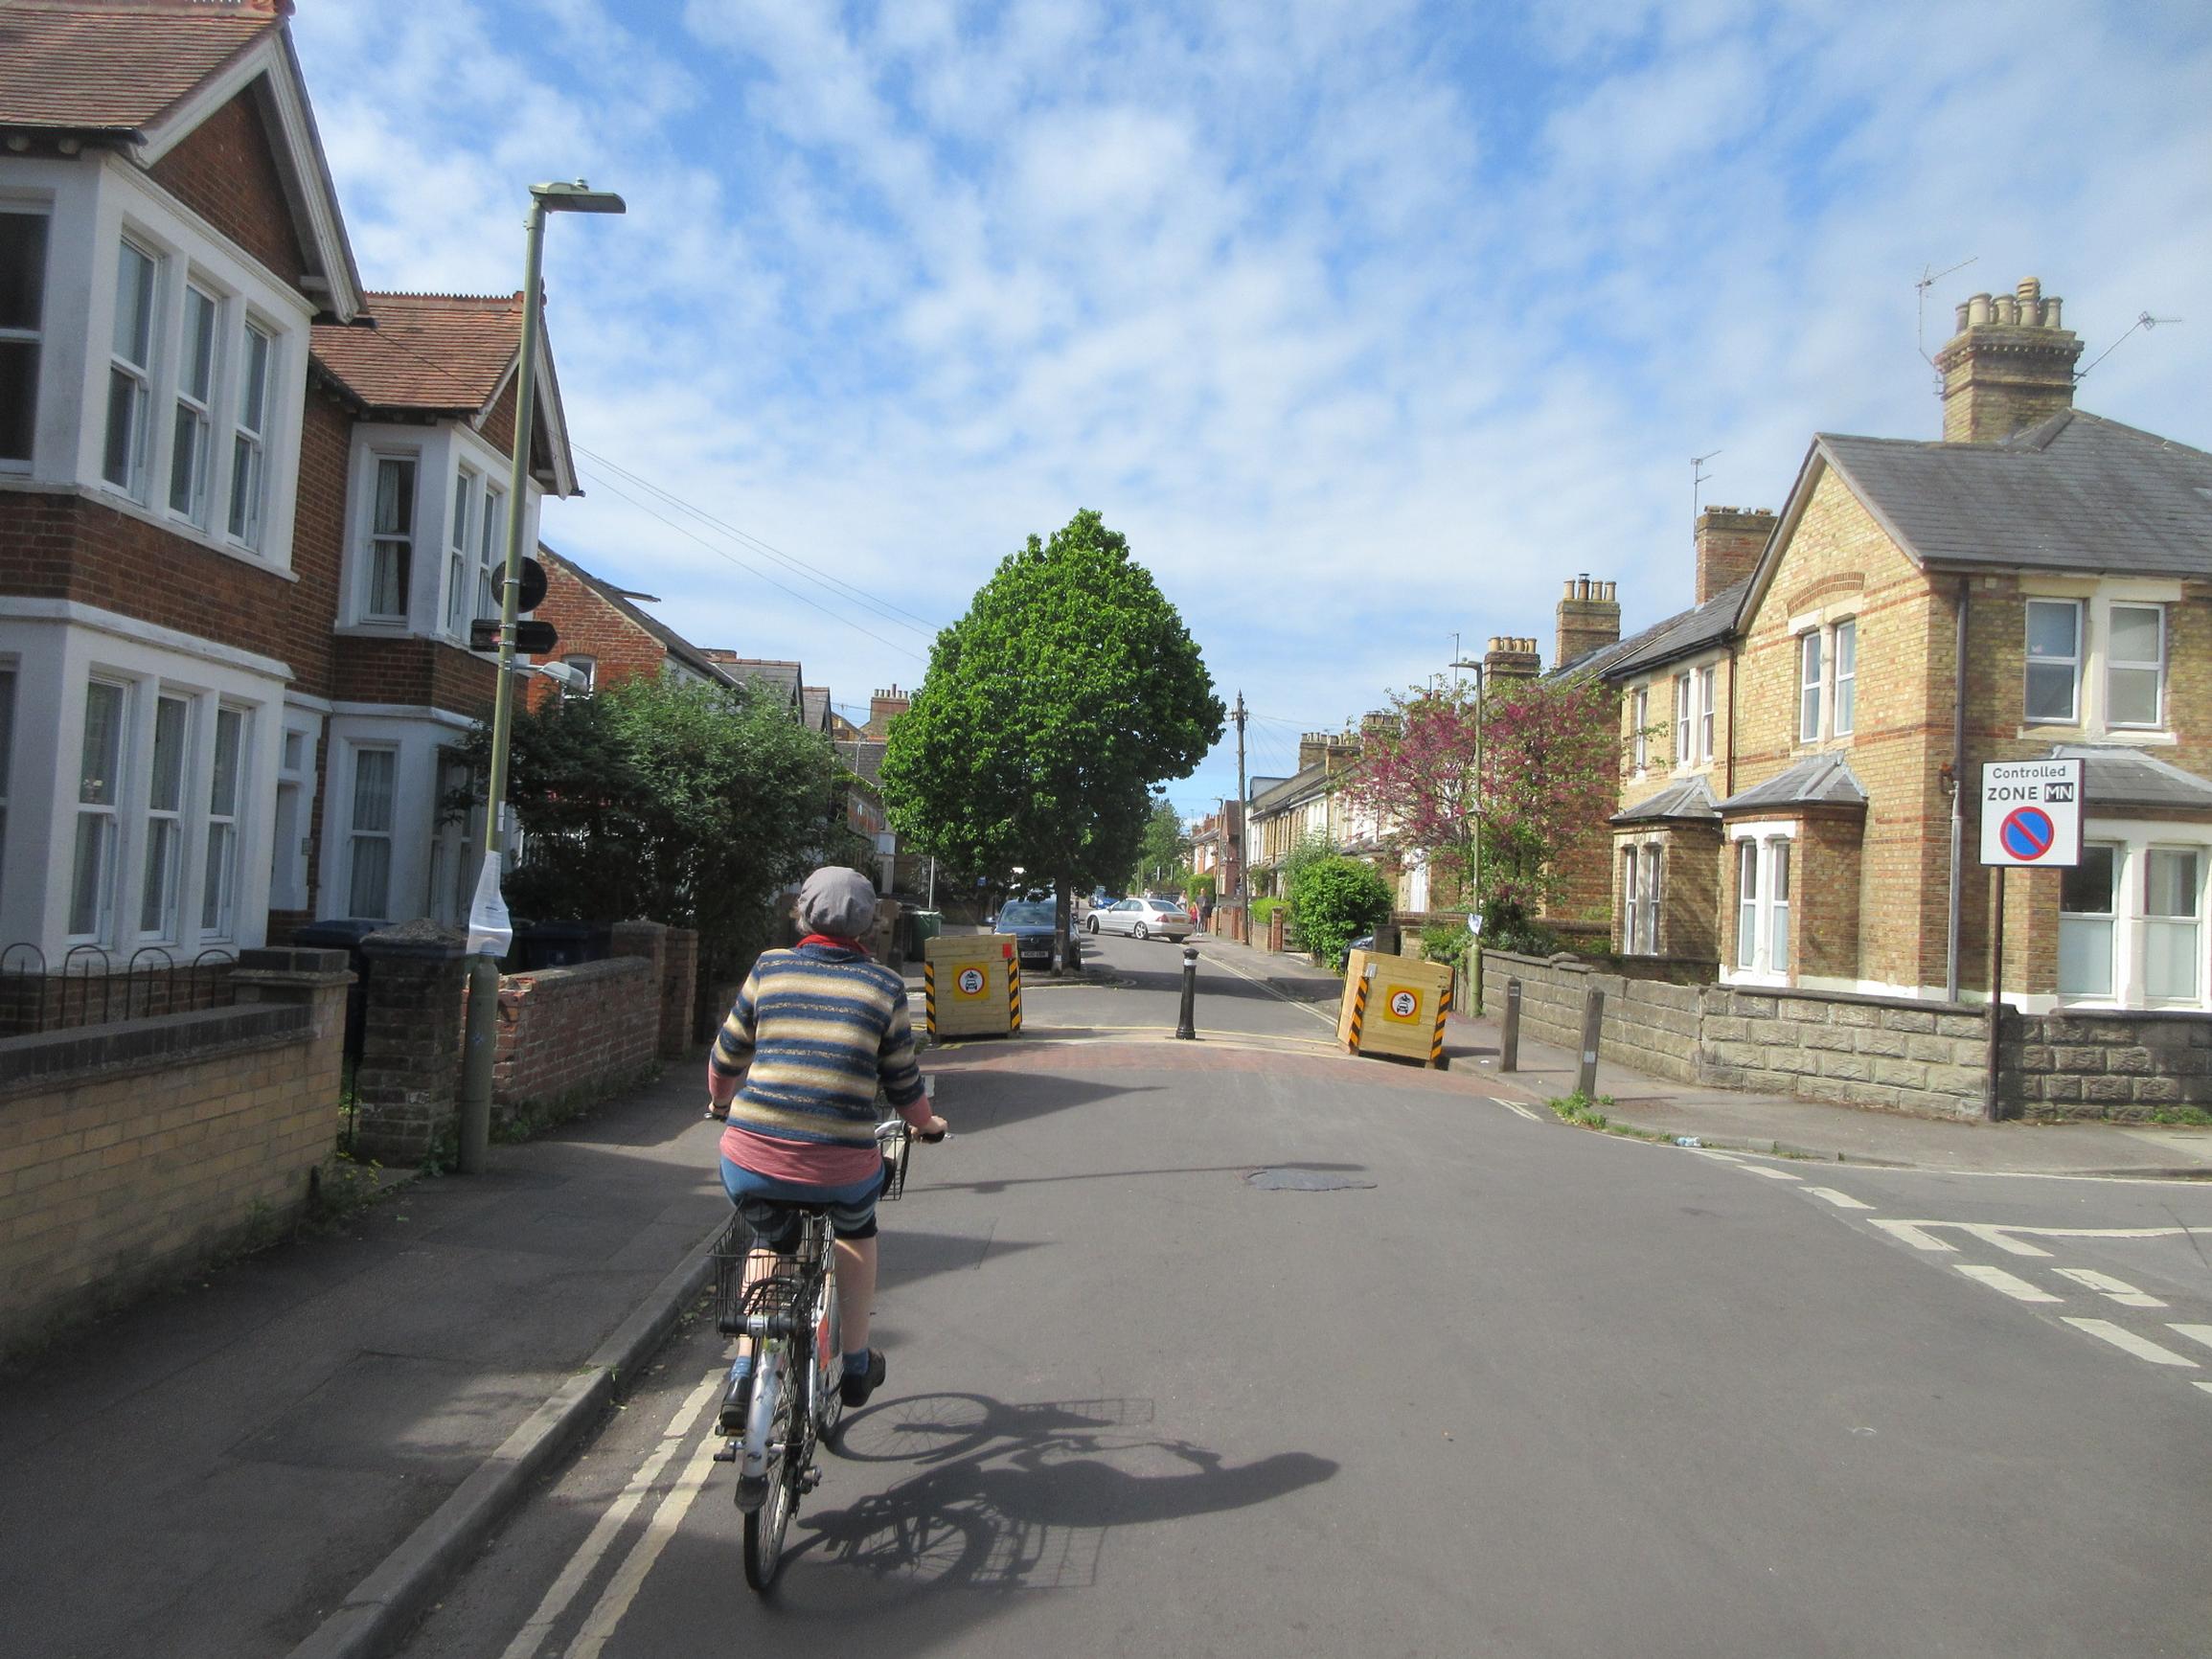 Oxfordshire County Council sees LTNs as part of wider plans to improve road safety